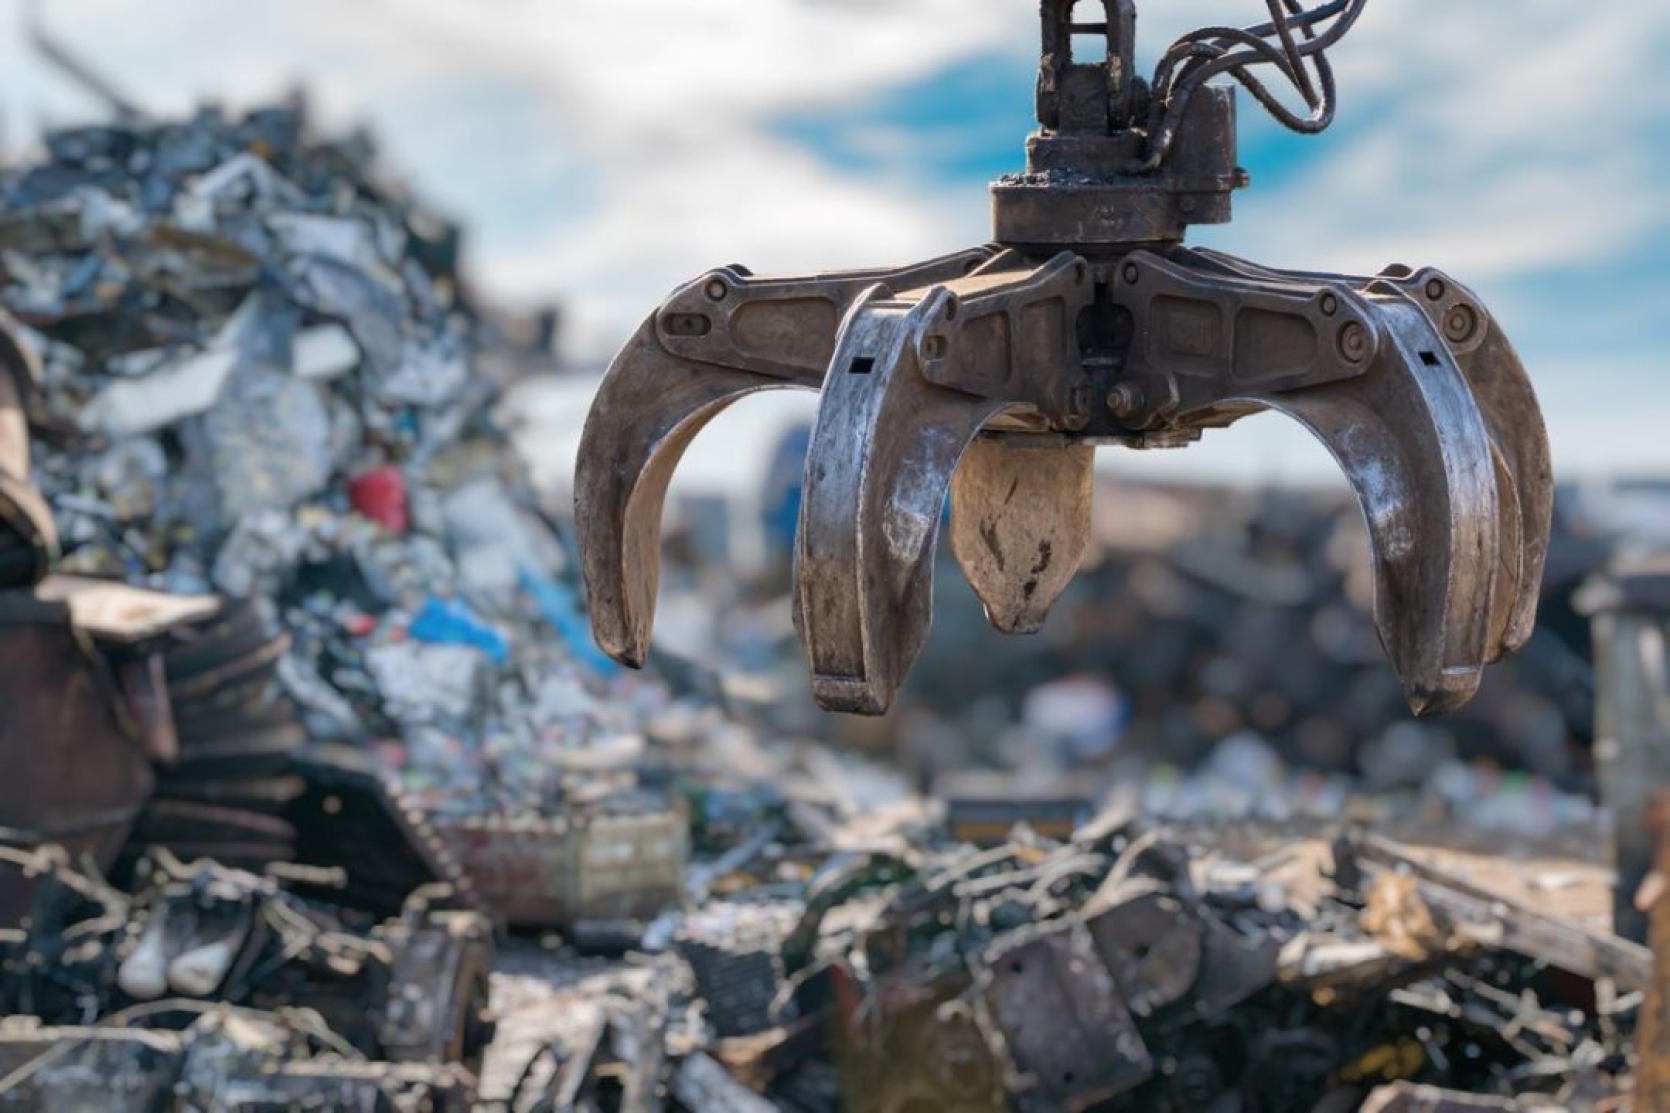 HOW MANUFACTURING COMPANIES ARE USING RECYCLED MATERIALS